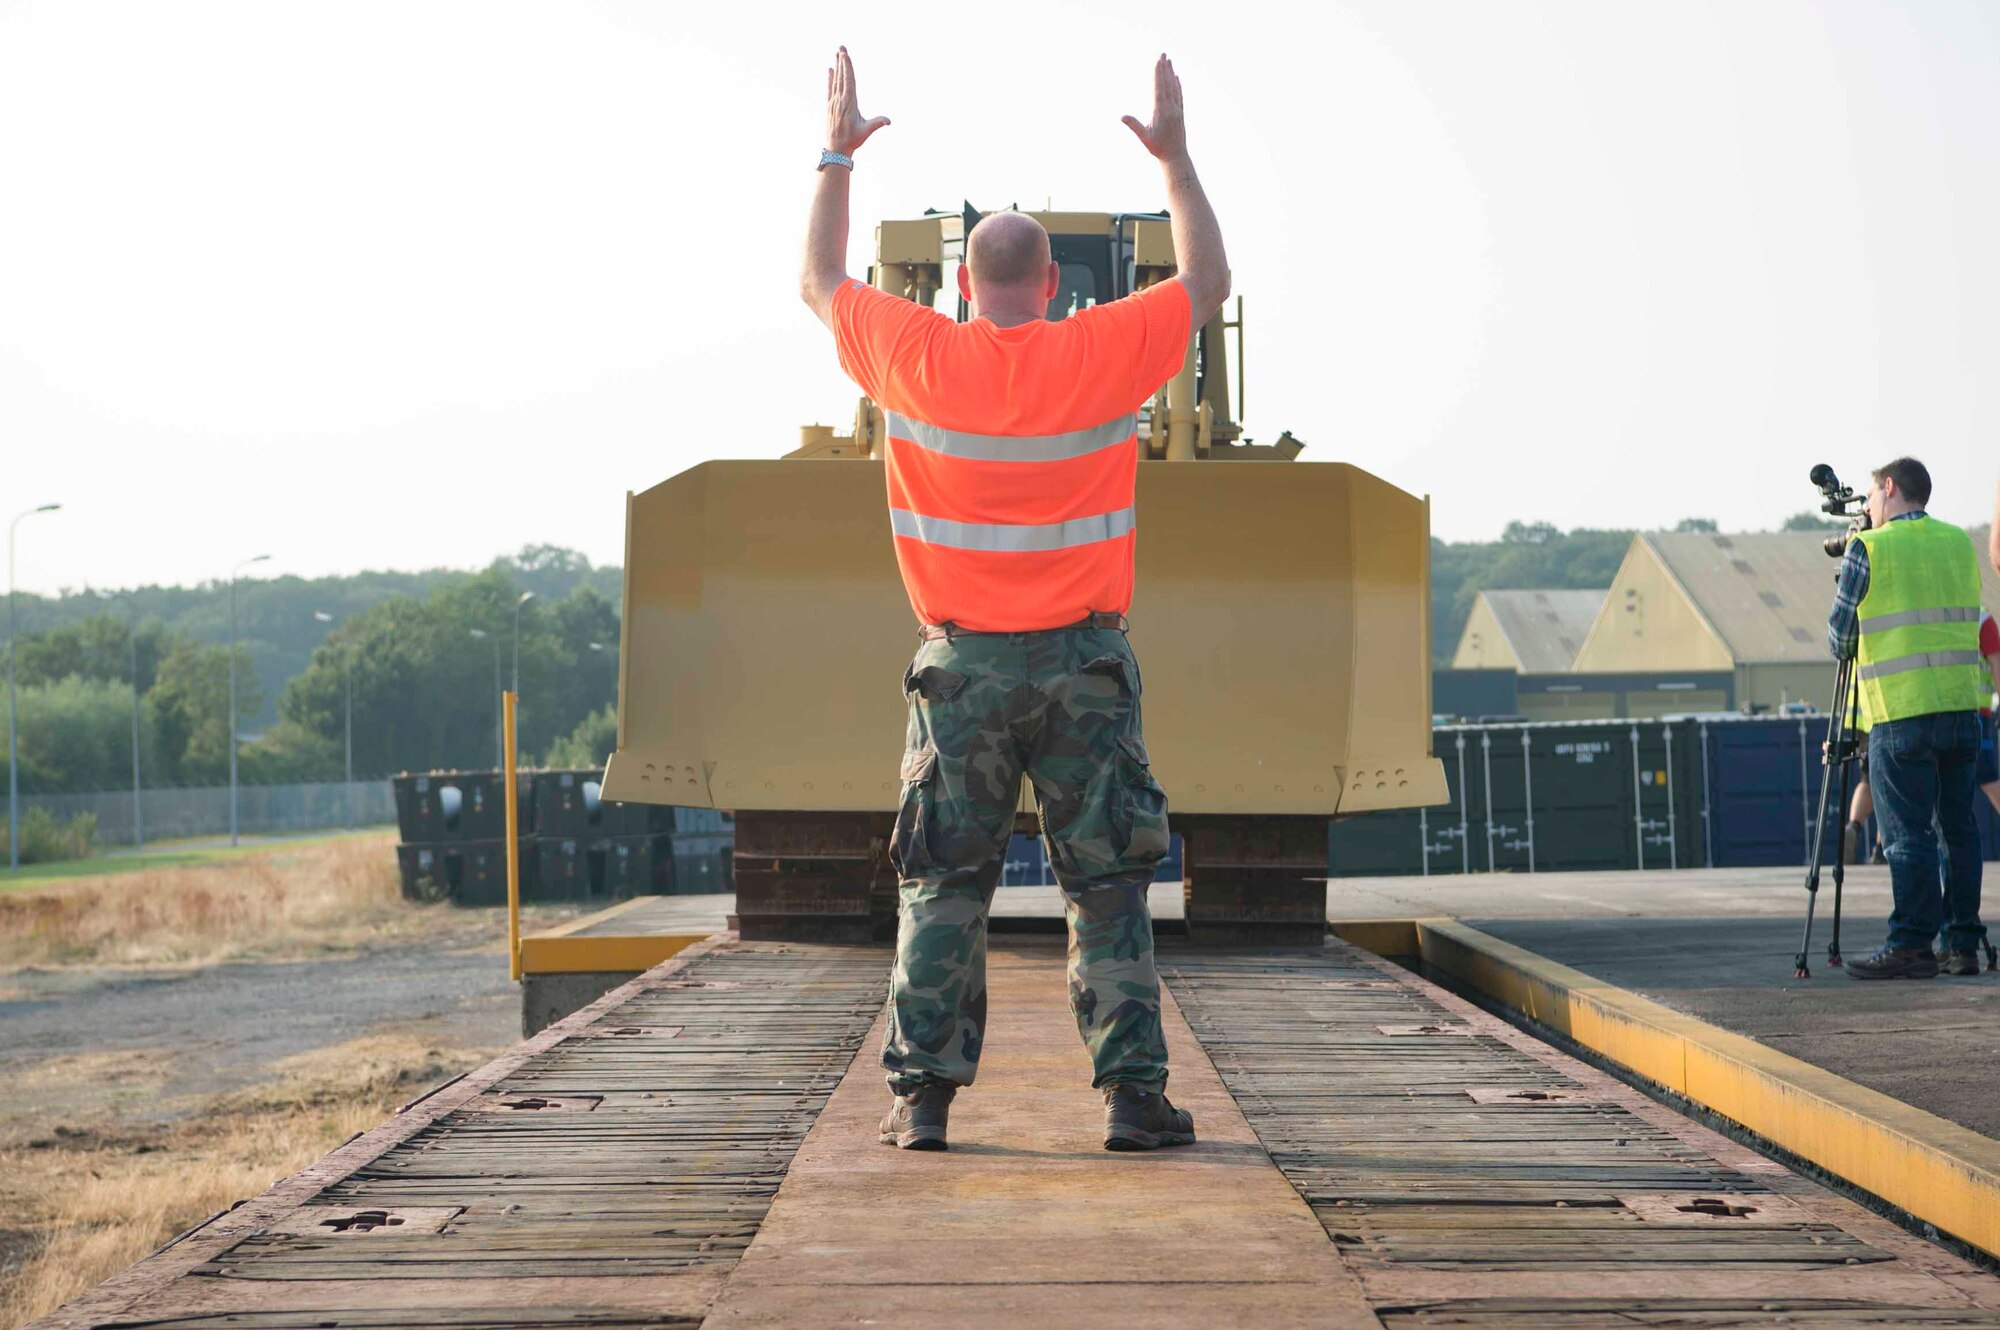 A Warehouse Service Agency employee directs a front loader operator onto a train car in Sanem, Luxembourg, July 23, 2018. The loading was part of an exercise in which a variety of vehicles and equipment, along with an estimated 55 U.S. Air Force and Army personnel, deployed to Krzesiny Air Base, Poland, to test their ability to rapidly set up a fully functional air base in an austere environment. (U.S. Air Force photo by Senior Airman Elizabeth Baker)